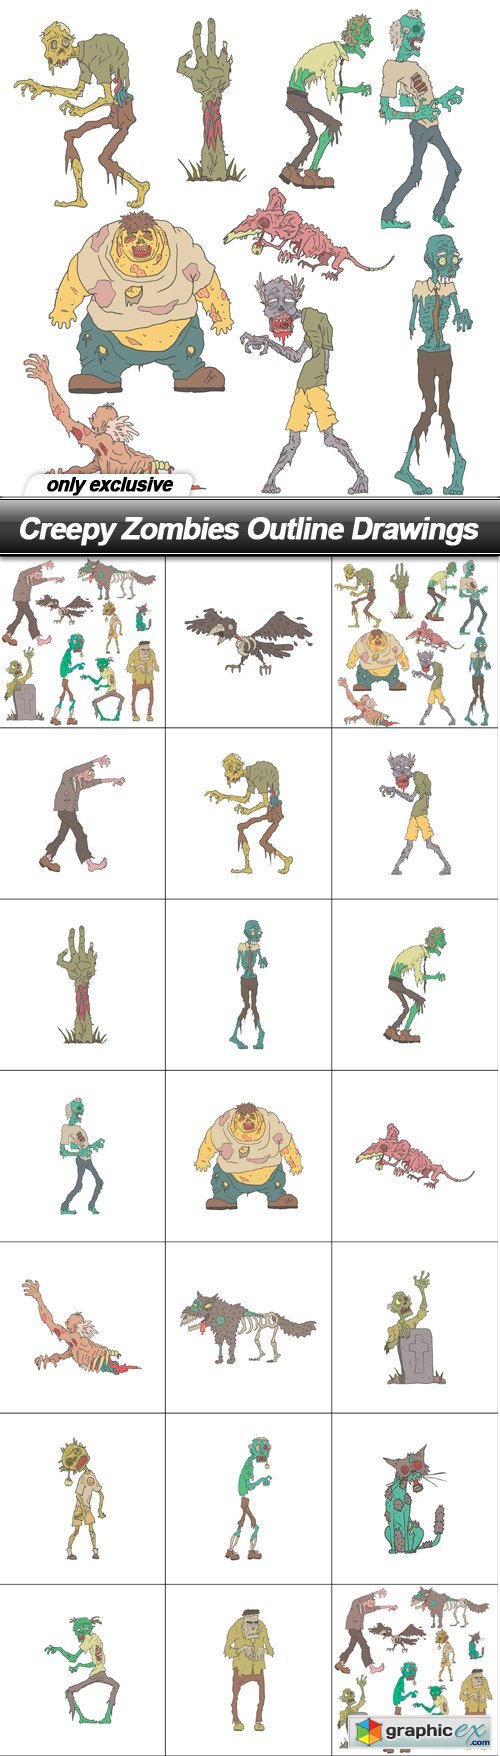 Creepy Zombies Outline Drawings - 20 EPS